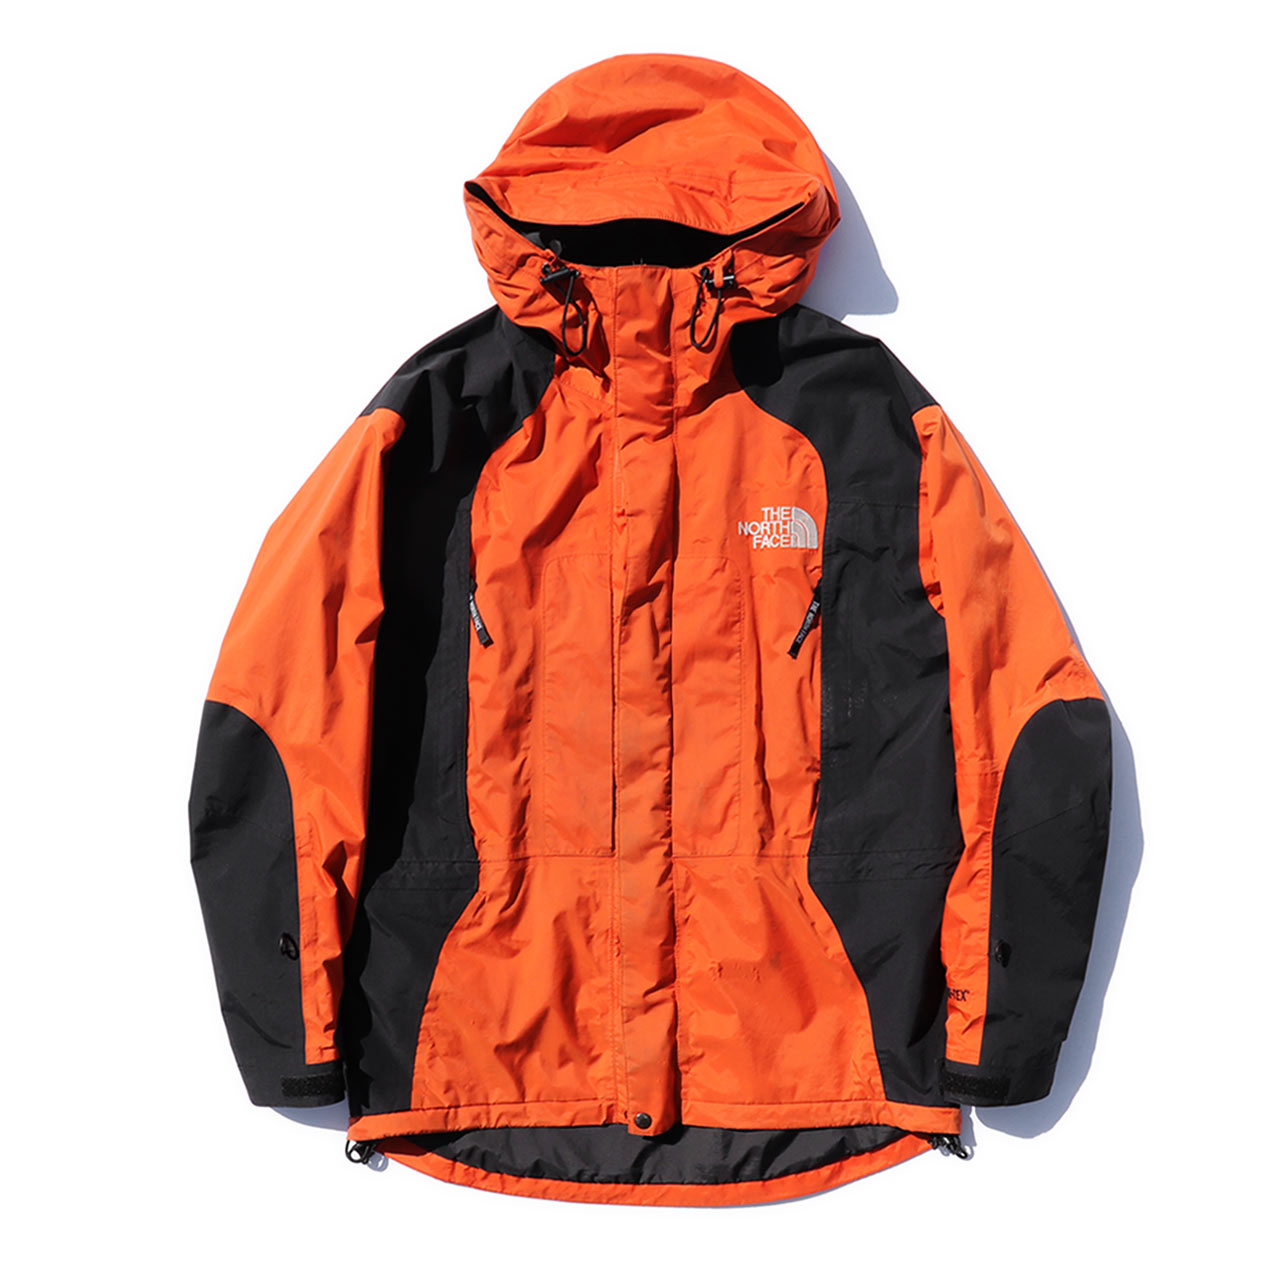 POST JUNK / 90's THE NORTH FACE GORE-TEX マウンテンライト 